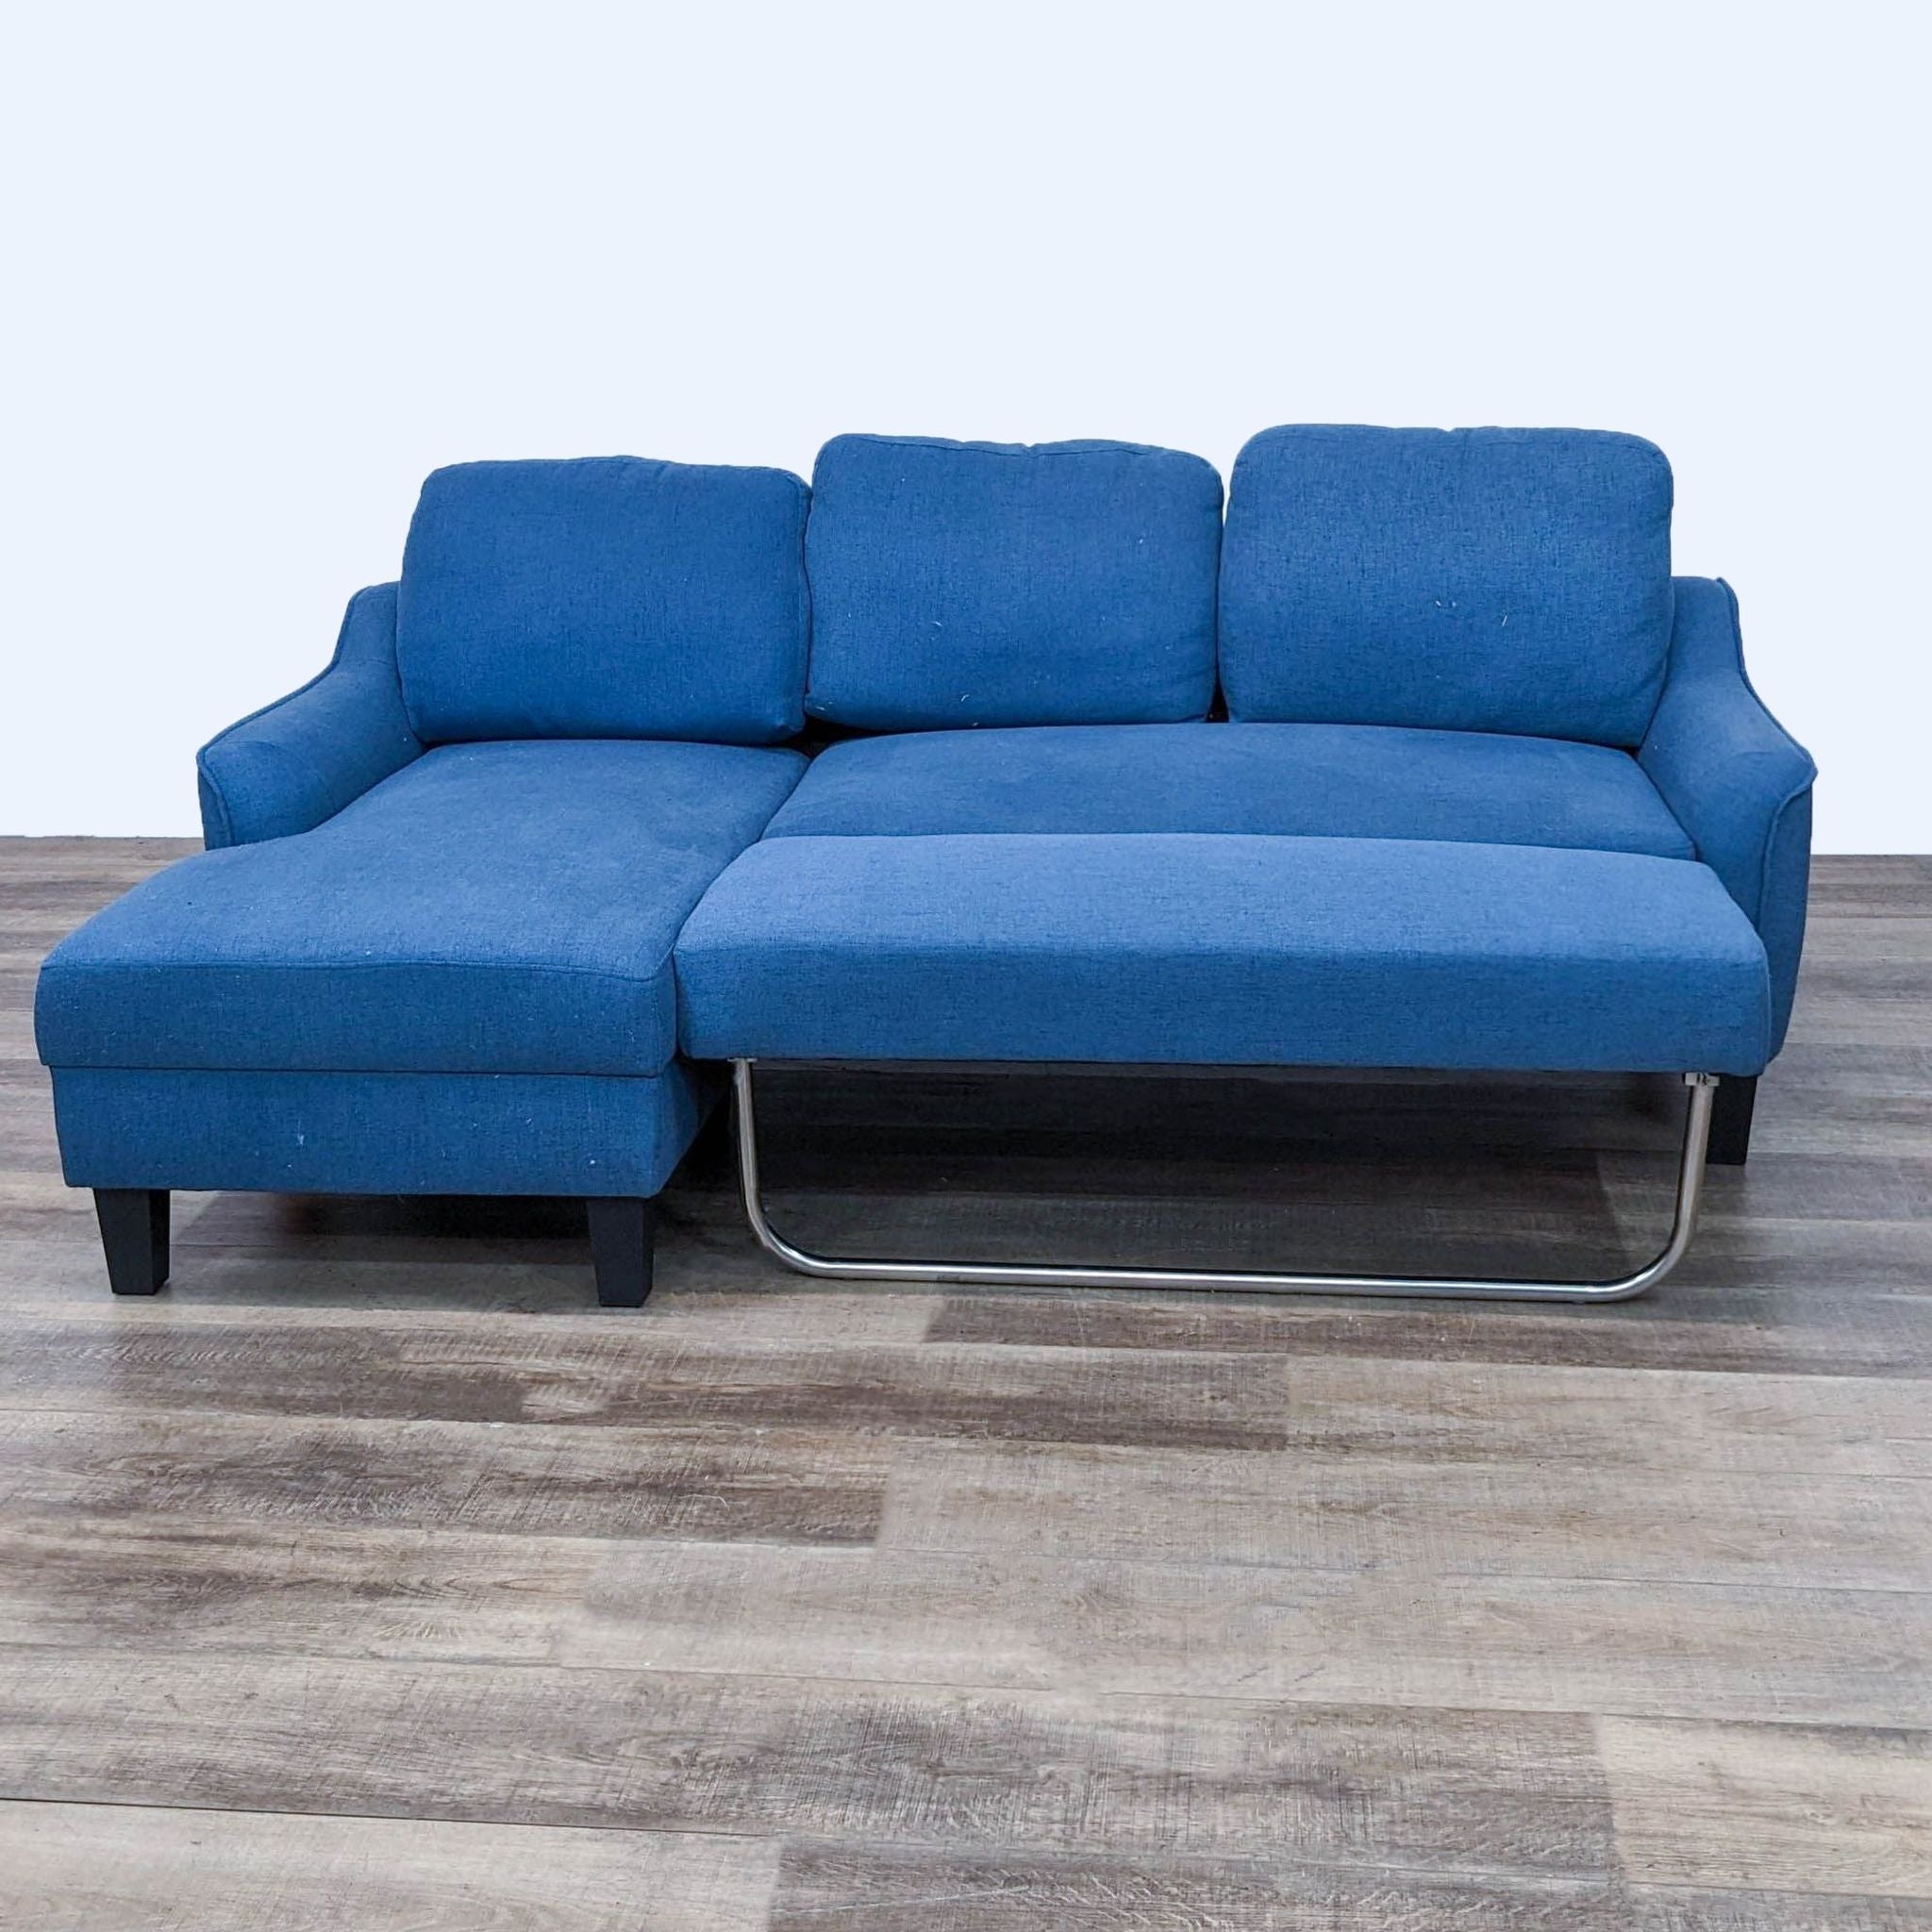 Blue Reperch sectional sofa with extendable sleeper space and metallic support, on laminated flooring.